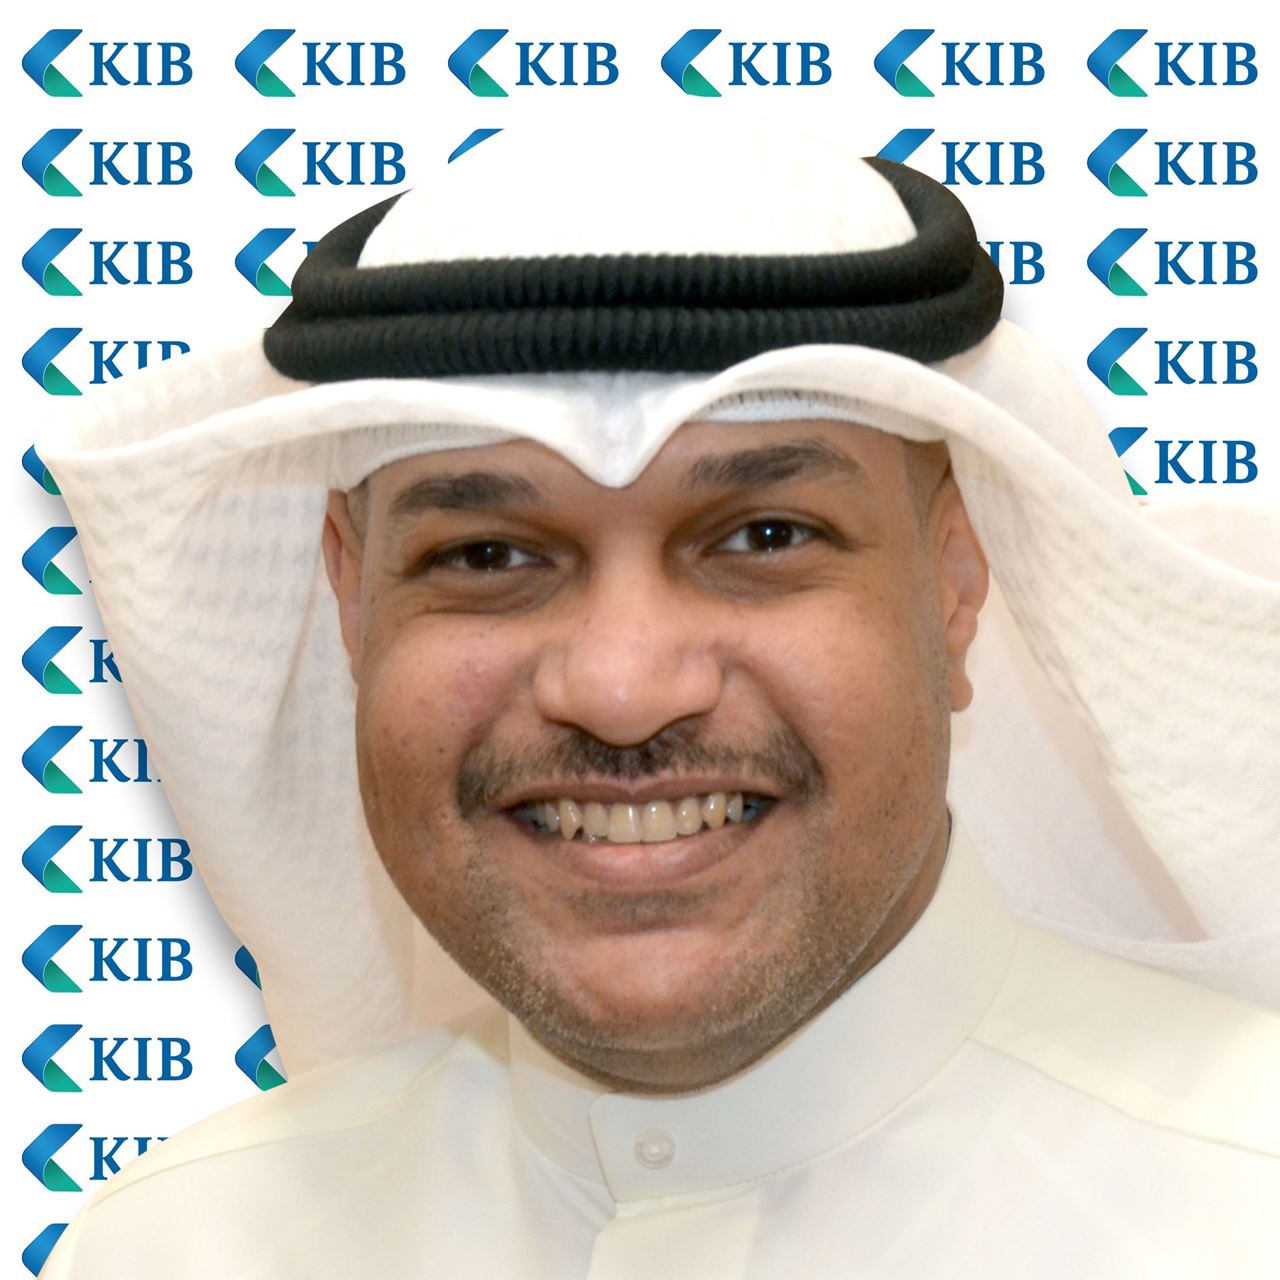 KIB reintroduces customers to its diverse financial products and services